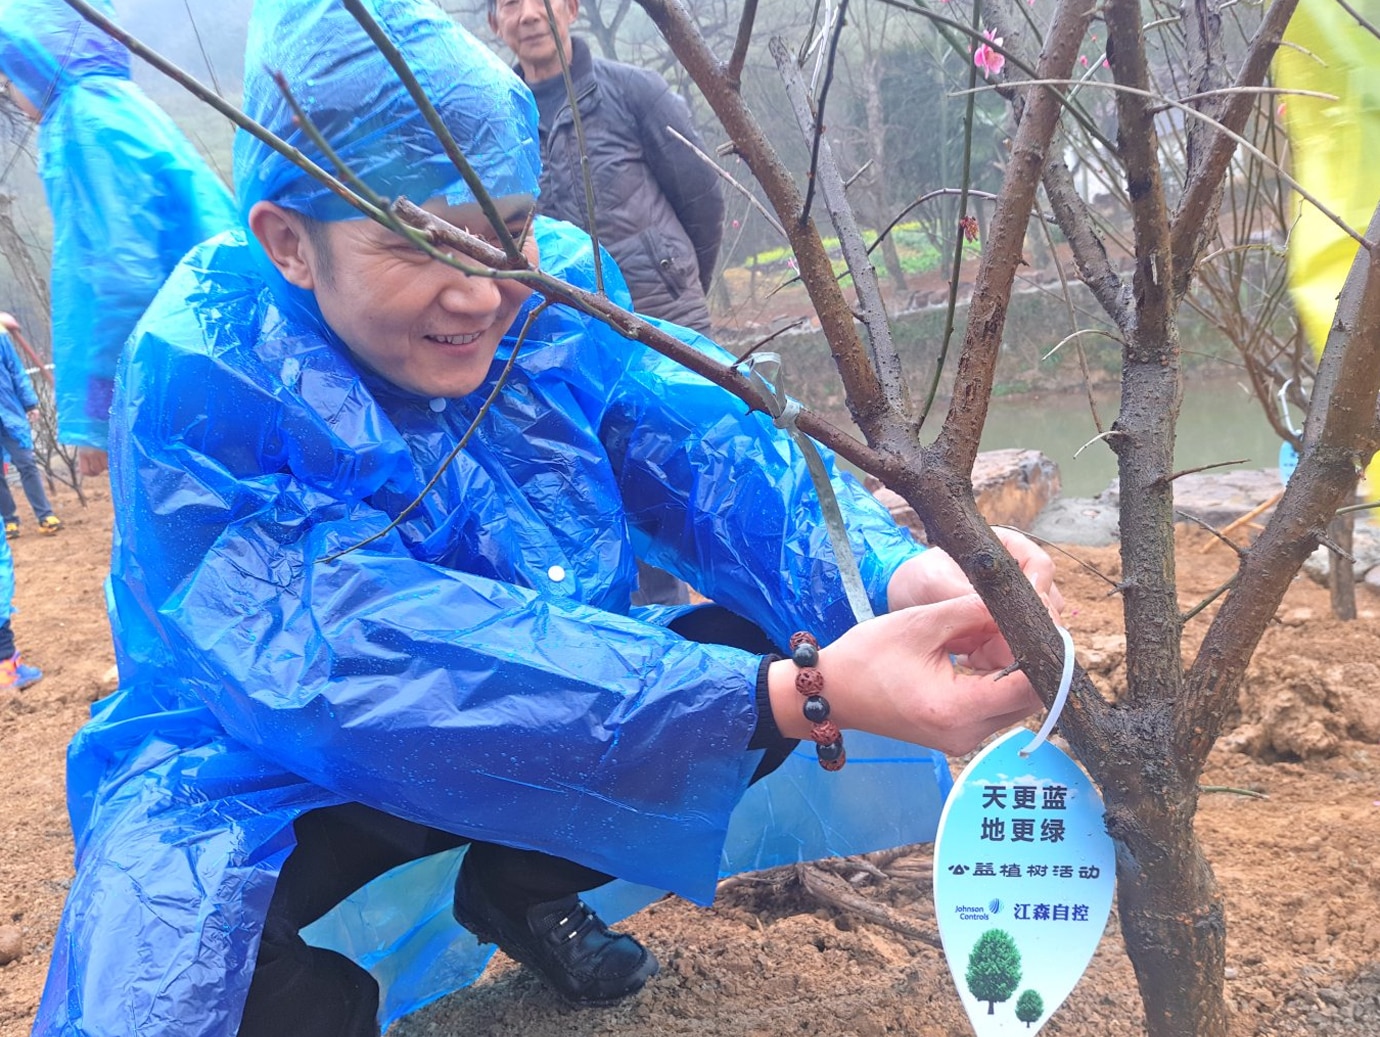 Man in raincoat tying a tag to a plant to promote sustainability